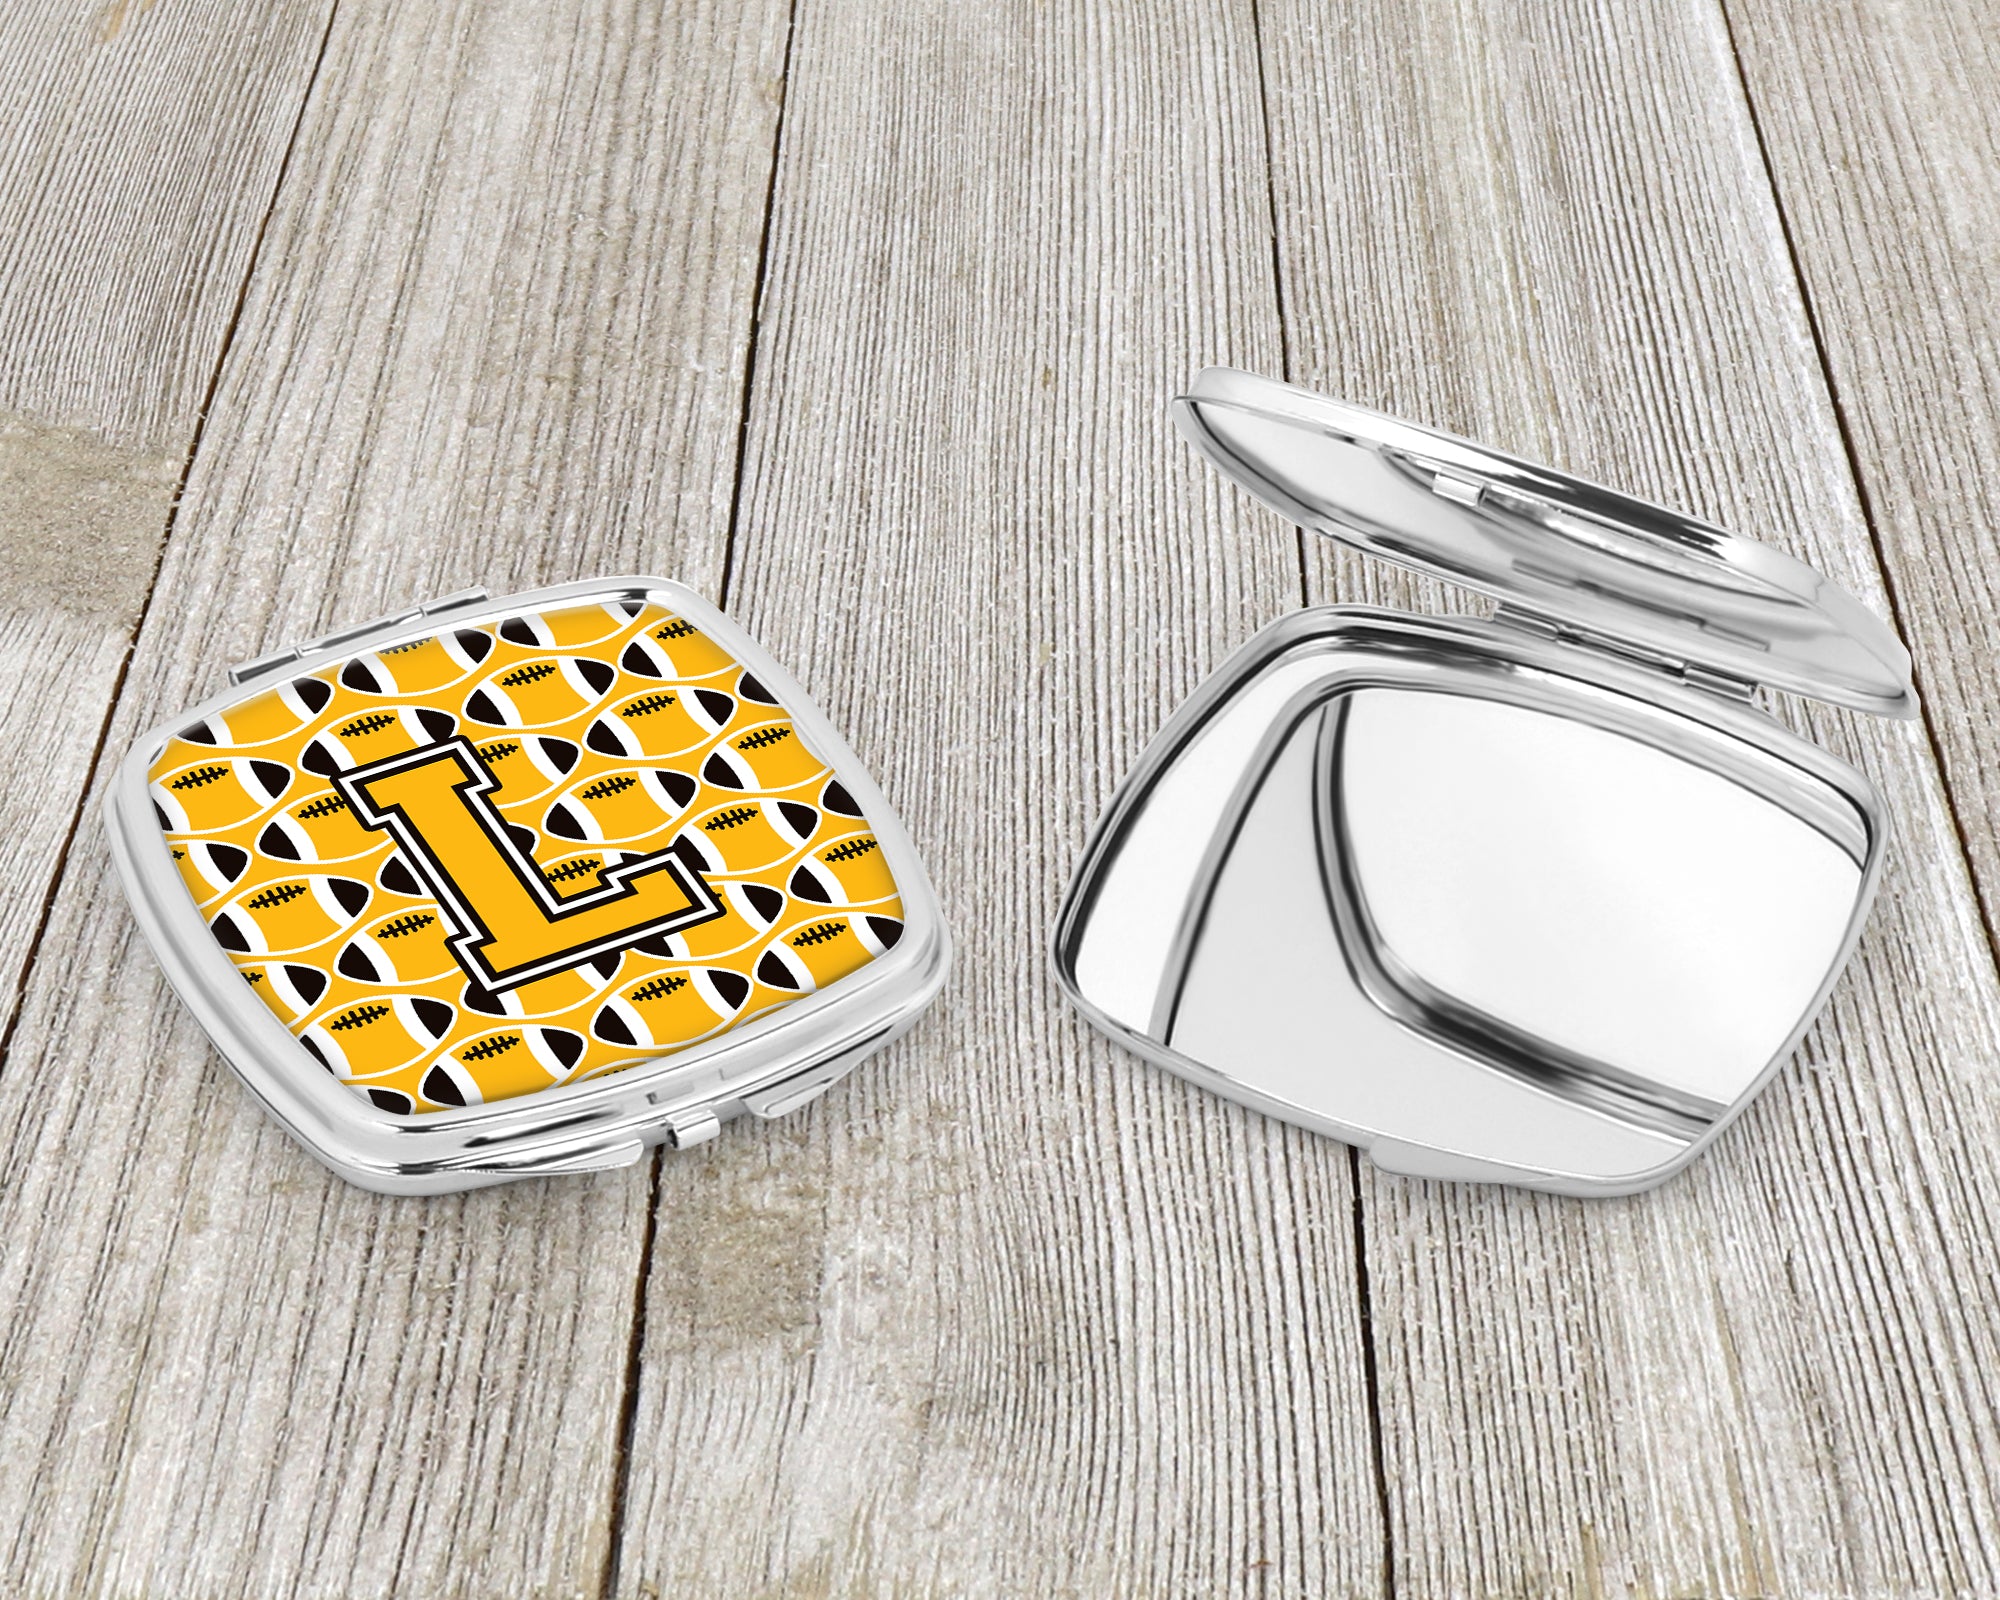 Letter L Football Black, Old Gold and White Compact Mirror CJ1080-LSCM  the-store.com.